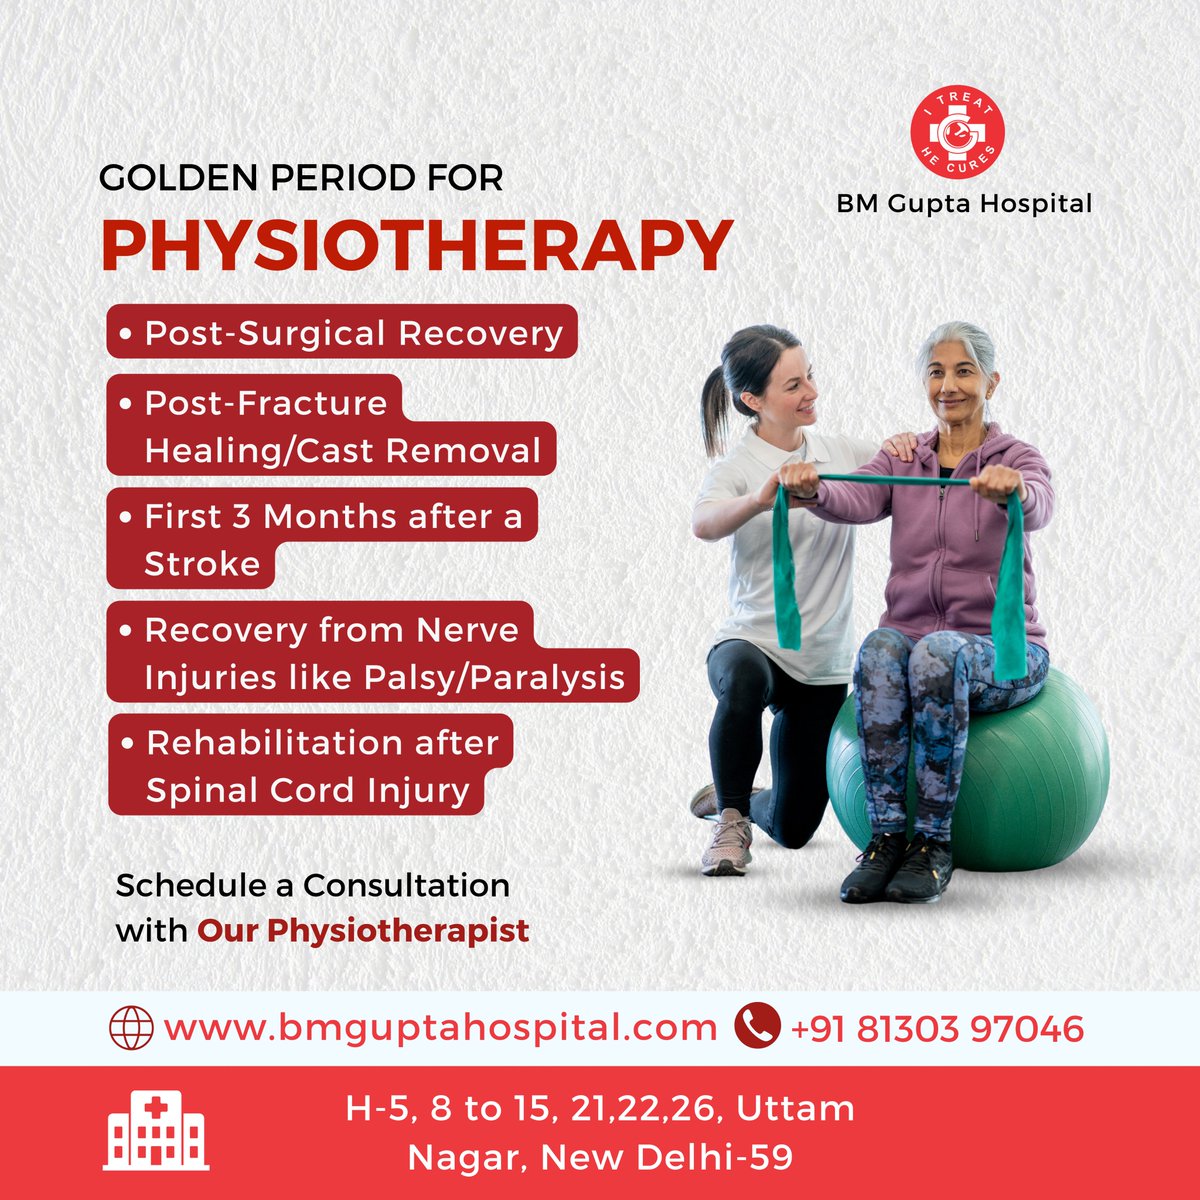 'Unlocking the Golden Period for Physiotherapy at BM Gupta Hospital.
For more info 
Call us at  91 81303 97046
Mail us: bmguptagnh@gmail.com

#BMGH #BMGuptaHospital #health #healthcare #PhysiotherapyCare #GoldenPeriod #RehabilitationServices #PostSurgicalRecovery #FractureHealing